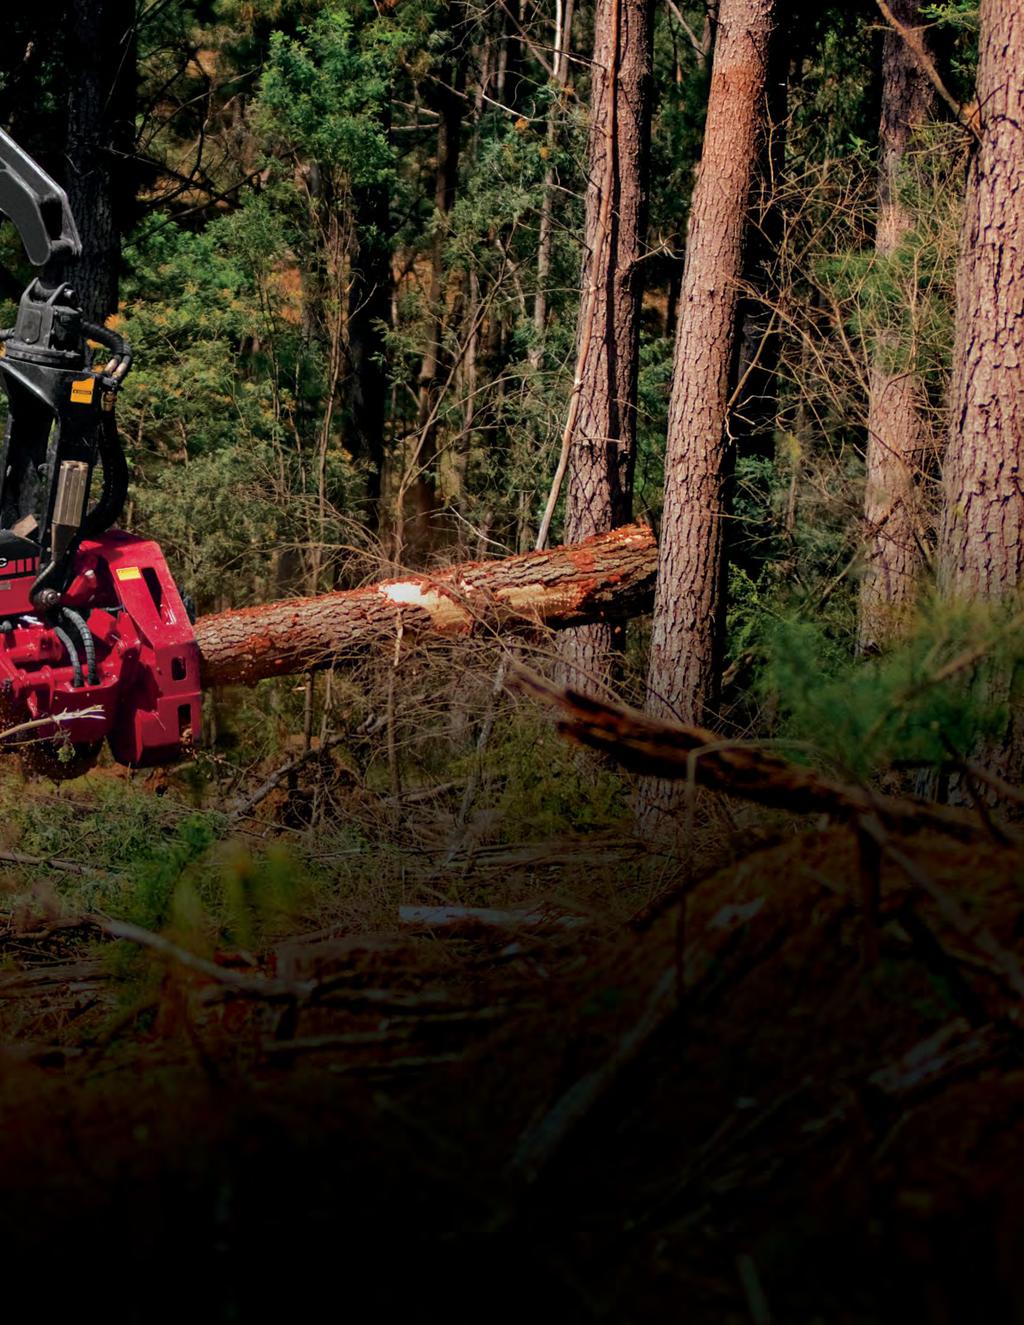 Brawn. And brains. No doubt our forest-tough tracked harvesters are hard workers. But who says that to be more productive, you have to choose between working harder and smarter?